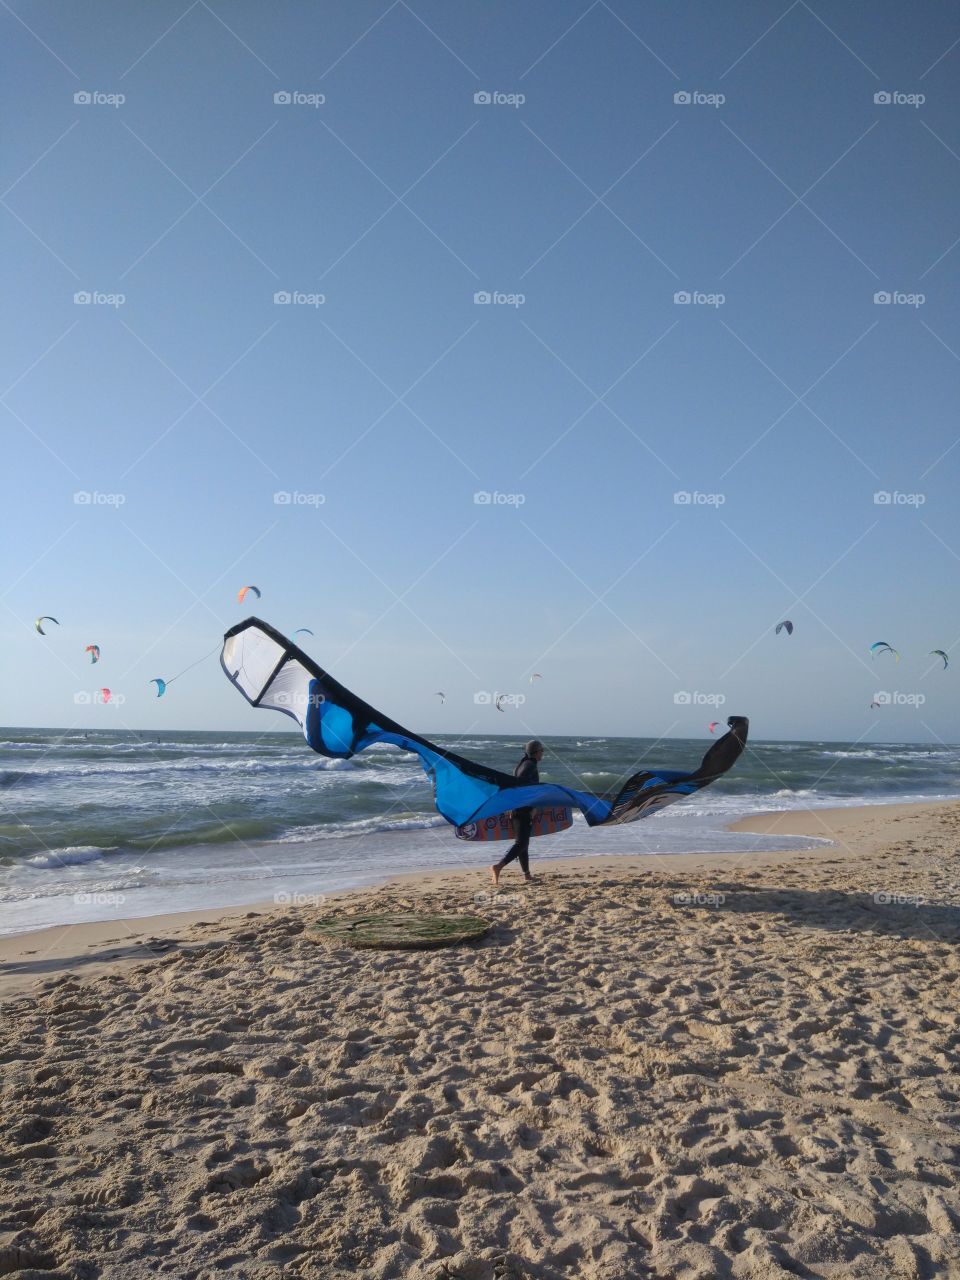 Kiteboarding is an action sport .
The power of the wind. Sea. Beach. Sunset